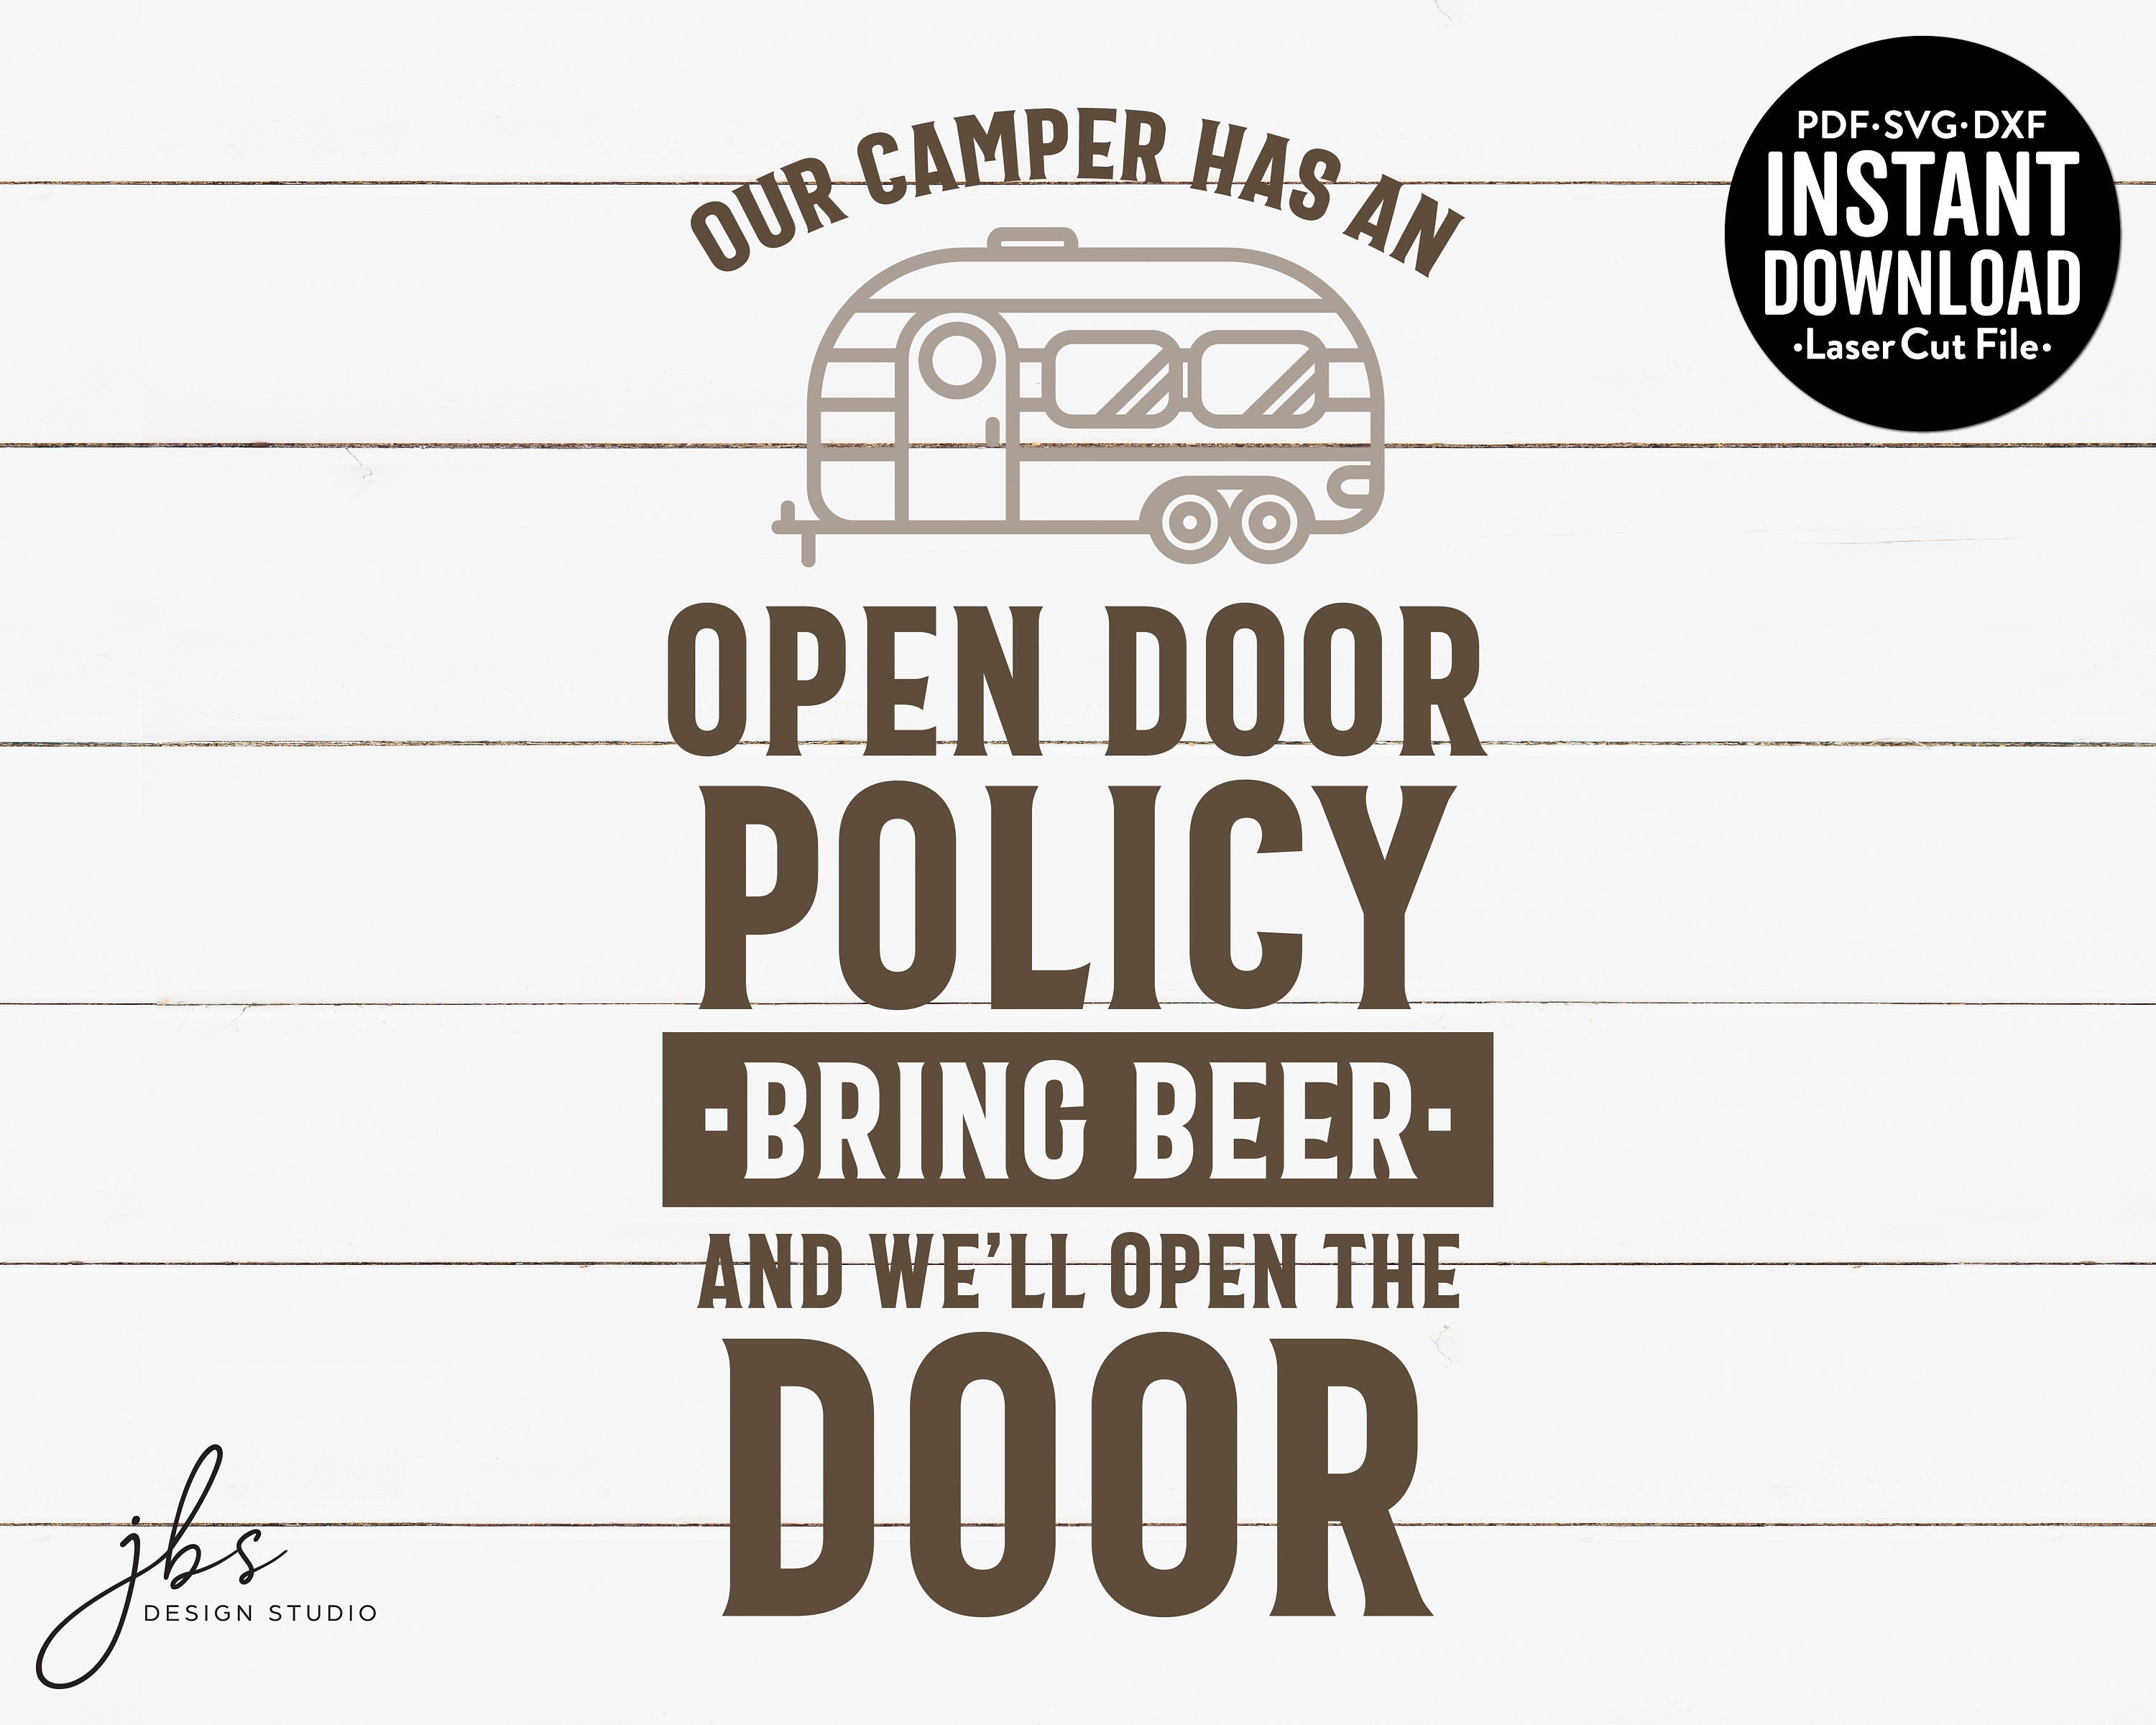 Why Your Business Should Adopt An Open-Door Policy 